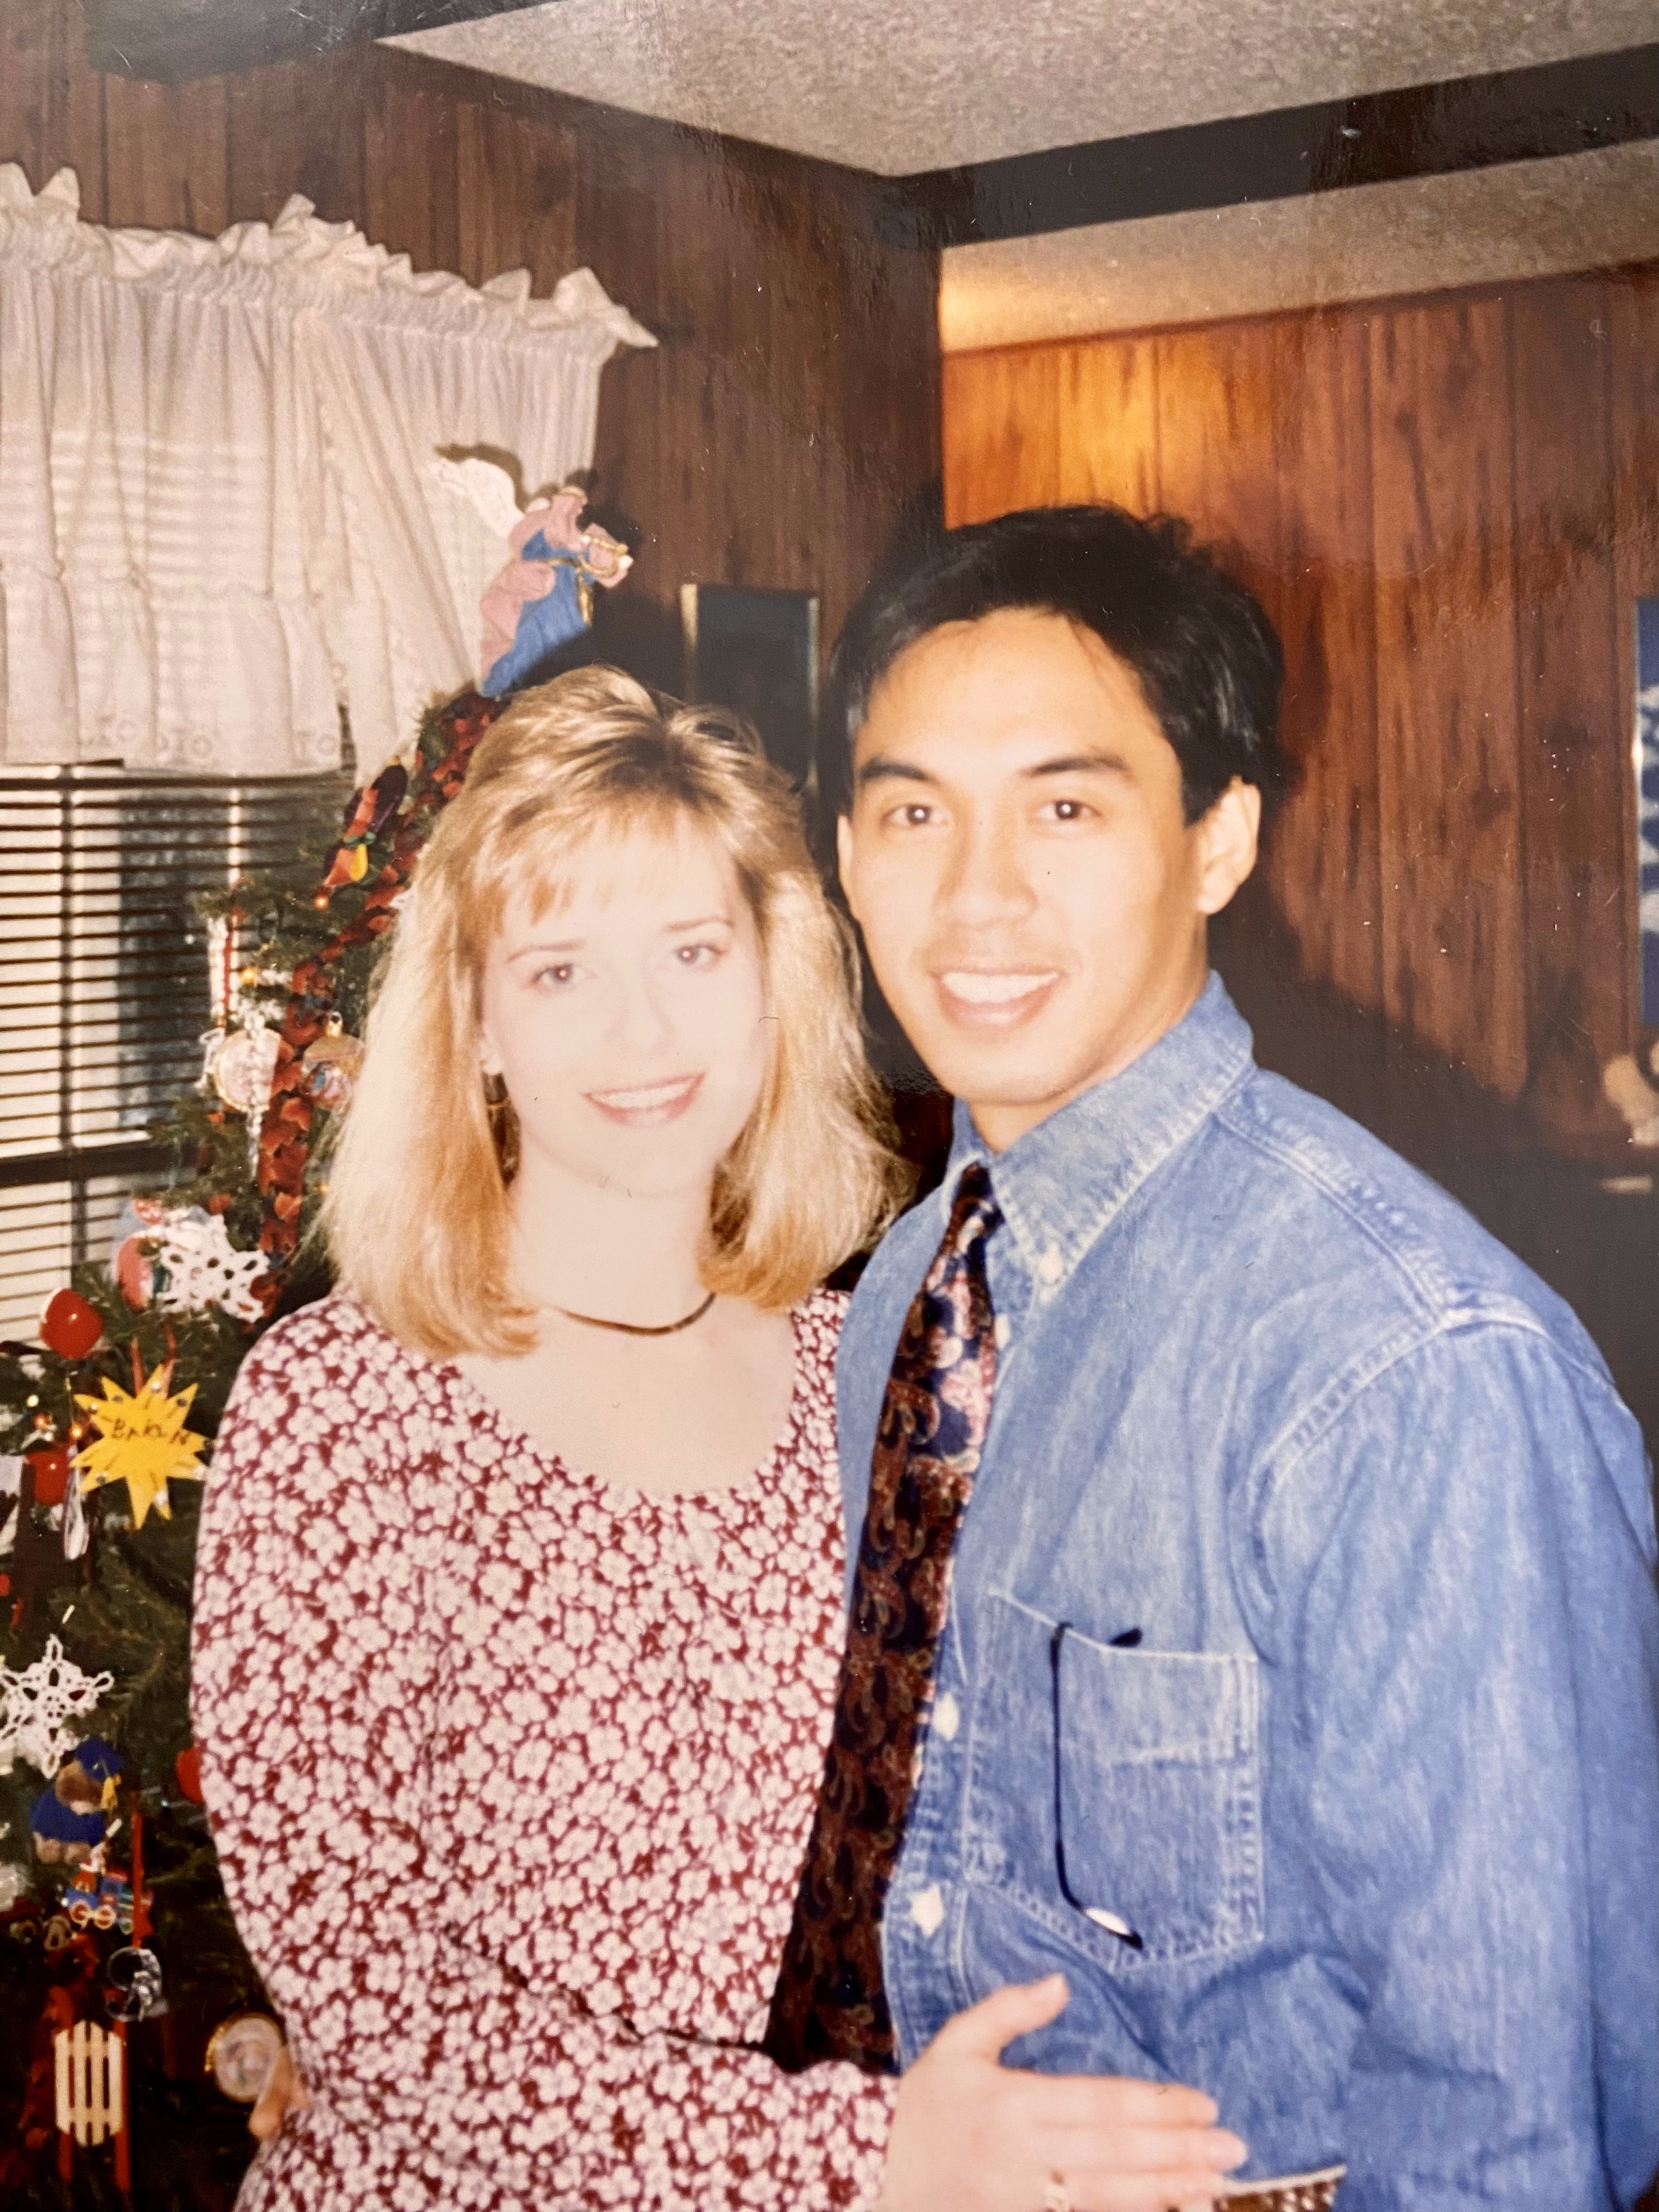 A photo of a couple from the 1990s.